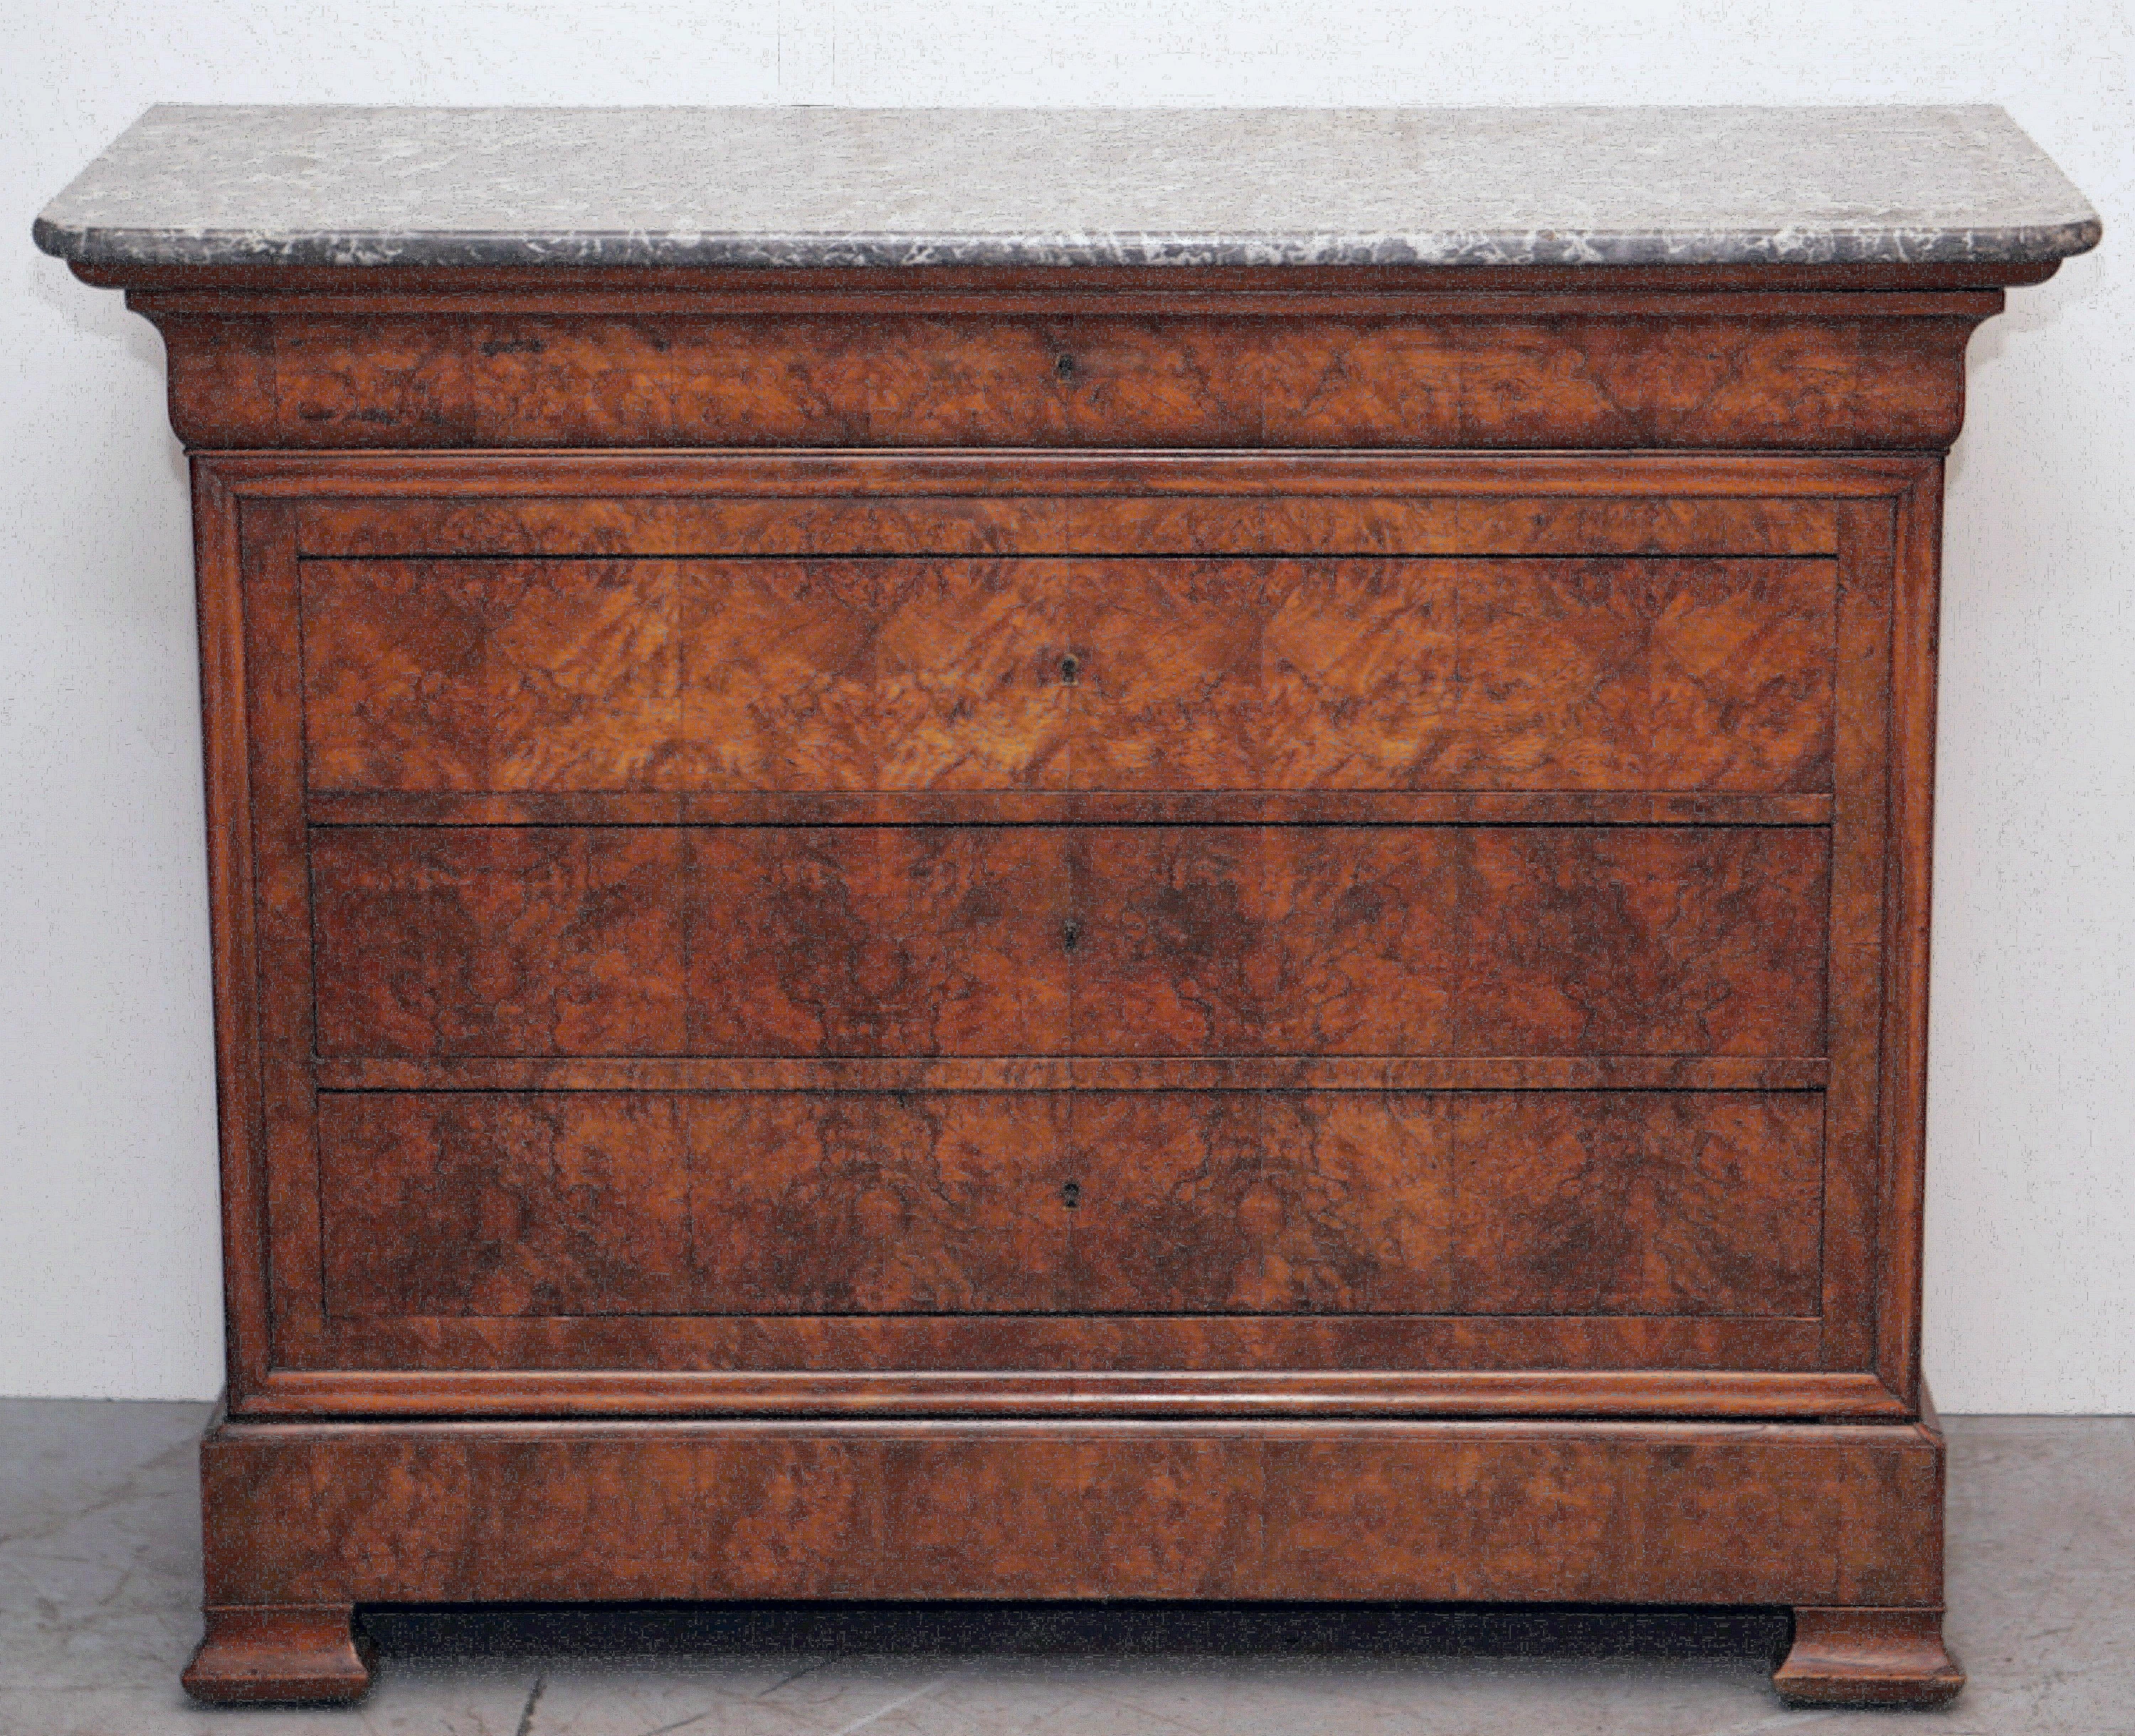 A handsome French Louis Philippe console chest or commode of beautifully patinated burled walnut with a figured marble top.
Featuring five fitted long drawers (four with keys), brass escutcheons, and set upon shaped bracket feet.